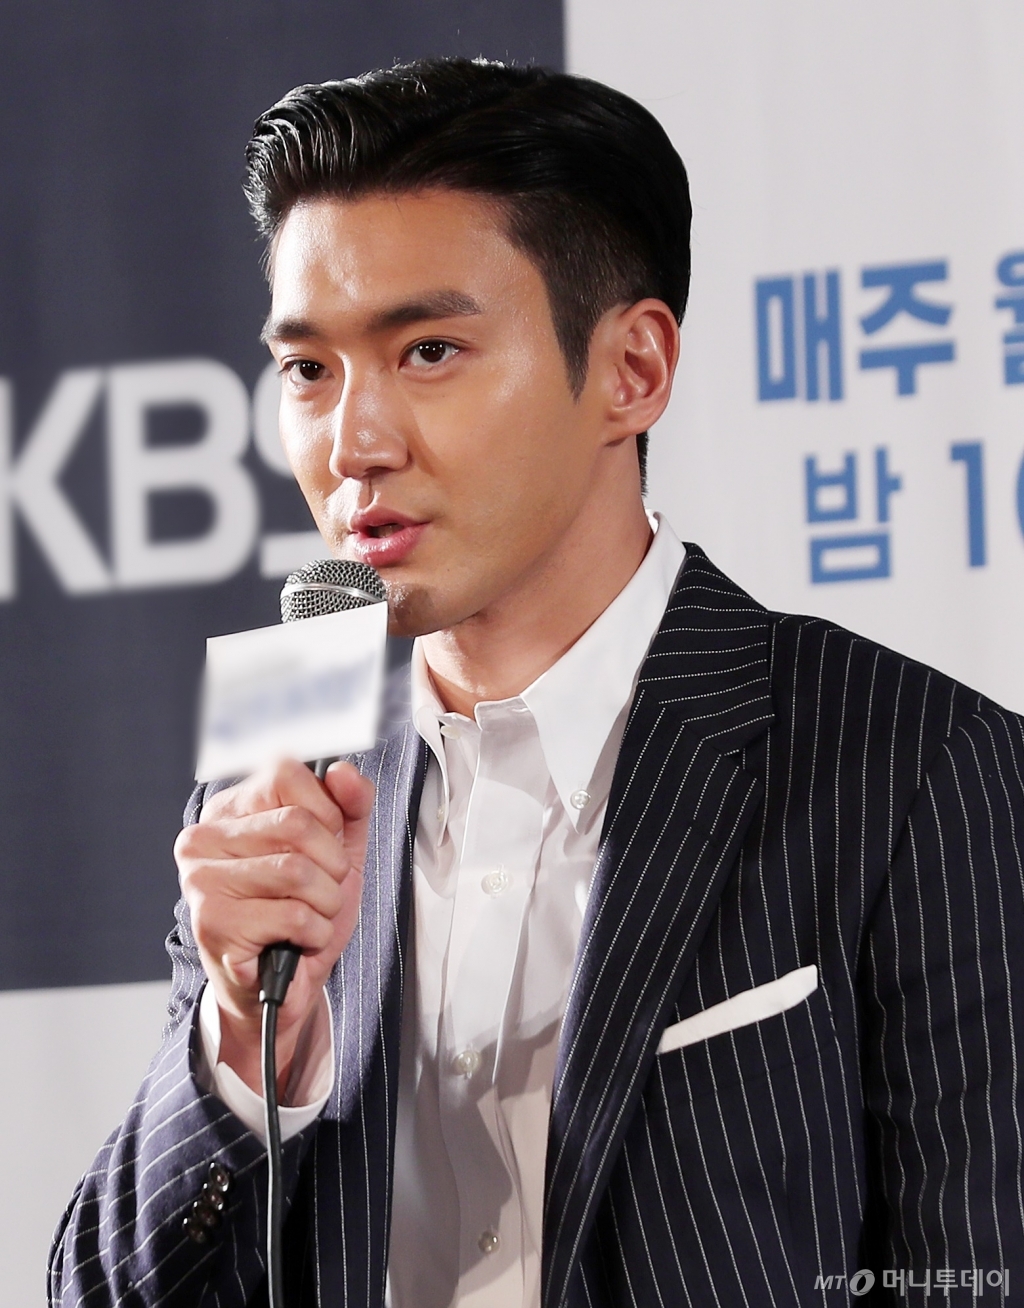 Group Super Junior Choi Siwon posted a tweet suggesting support for the Hong Kong protest, but was hit by China netizens.Choi Choi Siwon repeatedly apologized, saying Hong Kong is an inseparable part of China.Choi Choi Siwon said on his 26th Weibo (China edition Twitter Inc.) I recently apologized for hurting your feelings with wrong behavior on Twitter Inc., he said. As an entertainer, I have abandoned the expectations and trust you gave me.I am deeply reproached and sick about this. I have never denied or changed the idea and position that Hong Kong is an inseparable part of China, he said. I finally apologize to you again.Im sorry, he said.Choi Choi Siwon retweeted an interview with CNN in the US after Patrick Chow, who was seriously injured by a police shot during a Hong Kong protest on his Twitter Inc. on the 24th.China netizens immediately showed off their displeasure and tested because Choi Siwons retweet was accepted as supporting the Hong Kong protest.As the controversy grew, Choi Siwon deleted the tweet.I just expressed my interest (in the Hong Kong situation) with the hope that the (Hong Kongs) chaos and violence would end as soon as possible, he said, adding that he had written to his Weibo and confirmed what happened on Twitter Inc.Despite Choi Choi Siwons explanation, the anger of China netizens did not sink.Choi Choi Siwon fan club in Baba (), a community of Baidu, Chinas largest portal, also closed its official Weibo on Saturday.No one, nothing can change our position; we will never give way, the fan club said in a notice to Weibo.On the 24th, the police retweeted the interview with the Hong Kong protesters who were hit by the police,